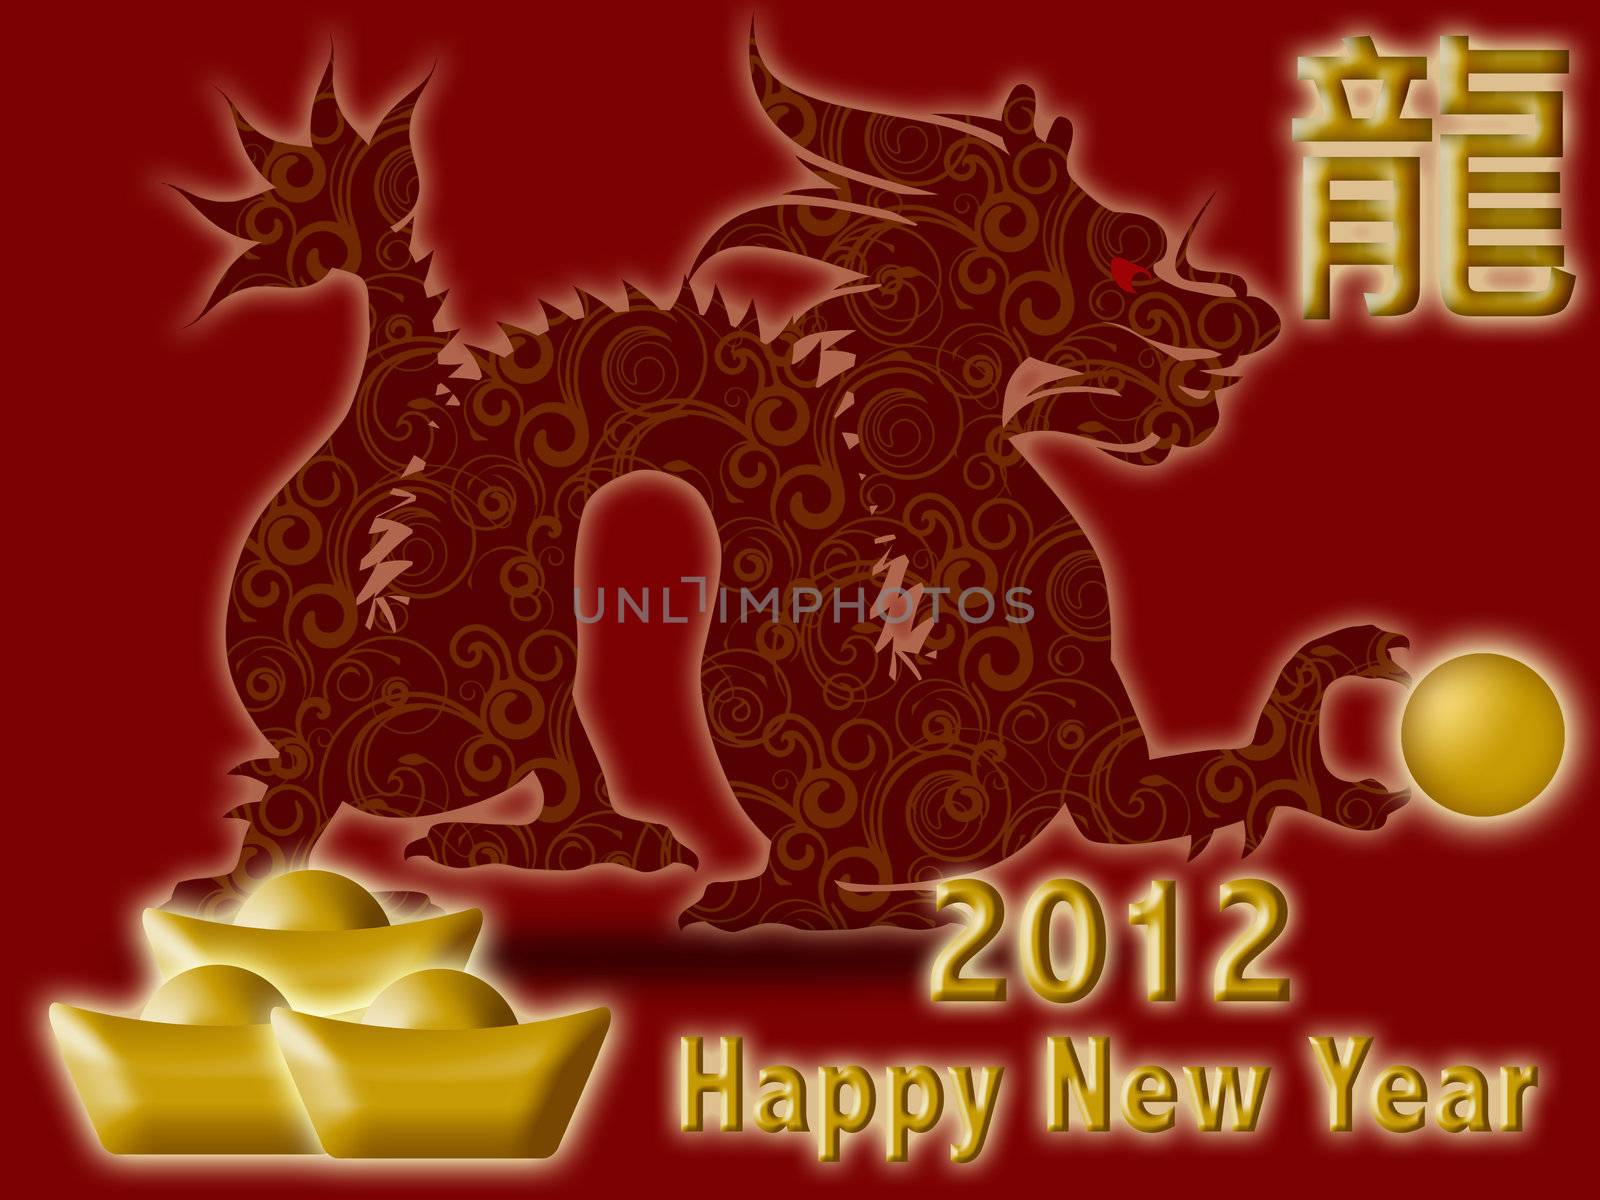 Happy Chinese New Year 2012 with Dragon and Symbol Red by jpldesigns